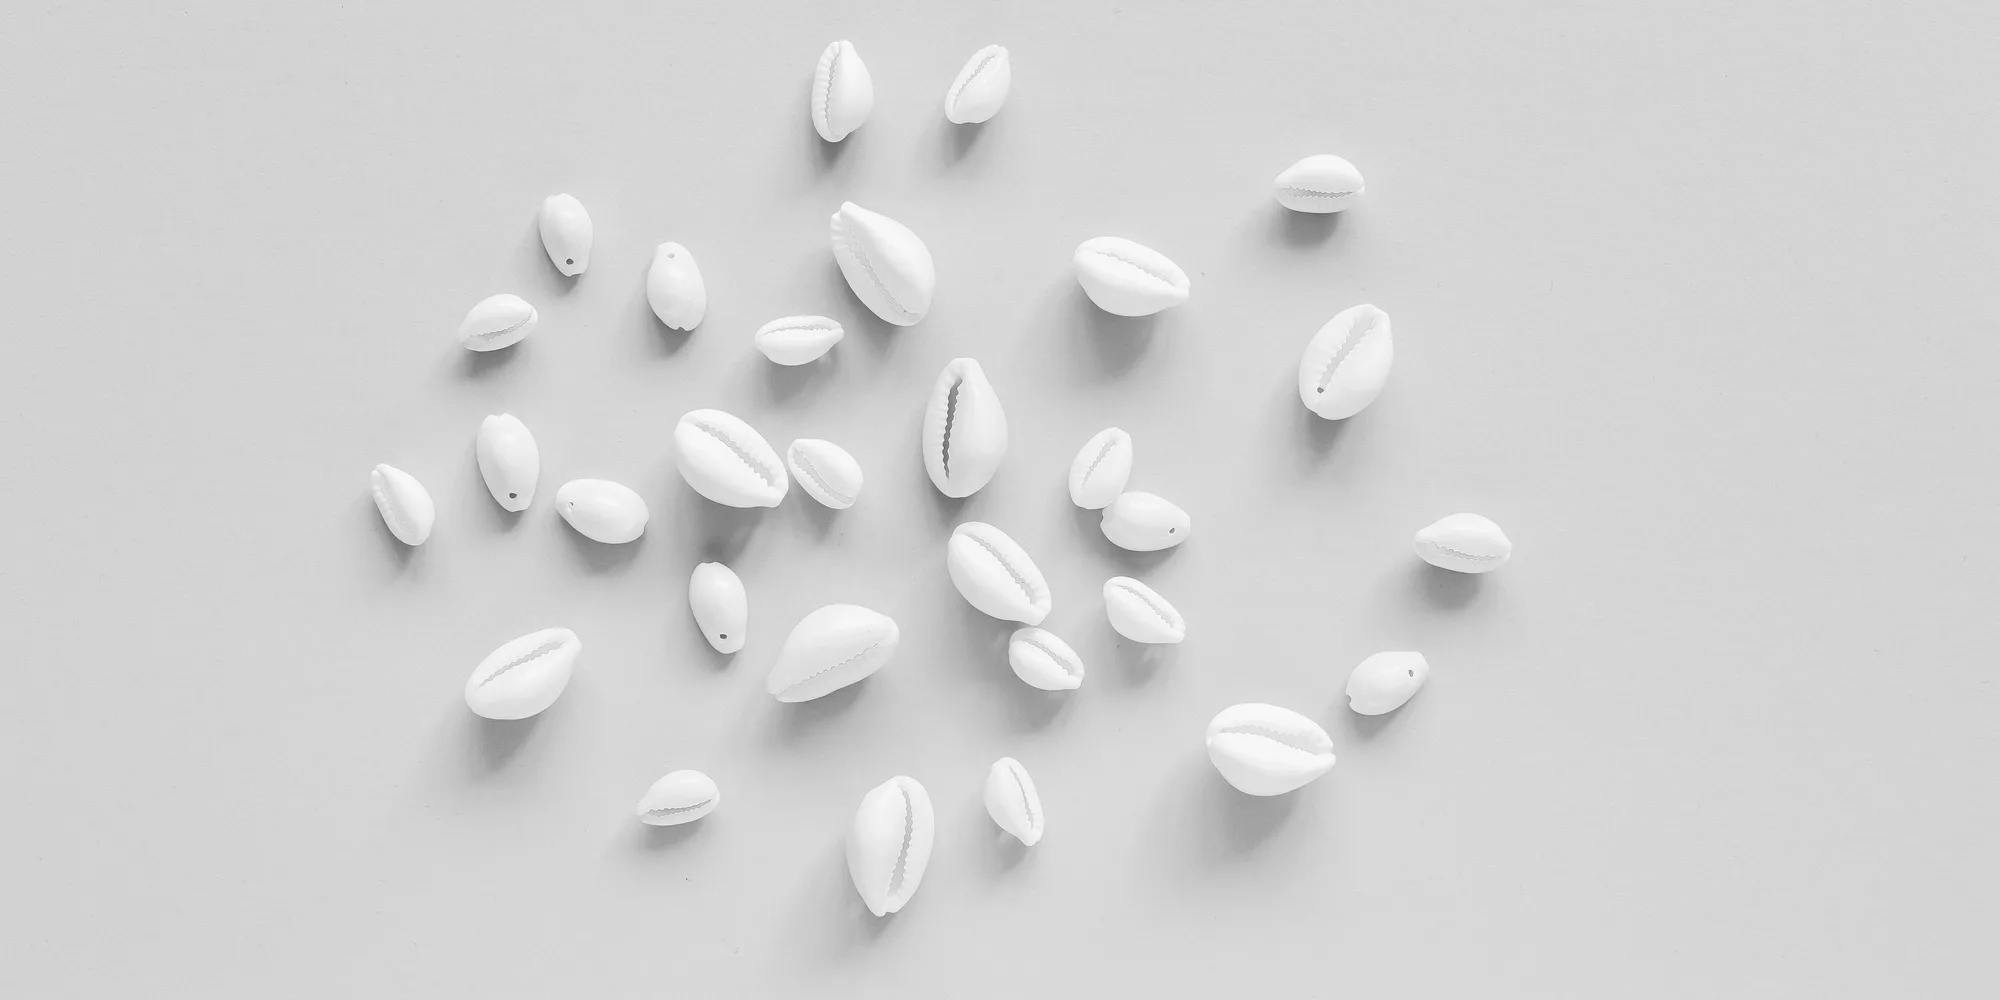 Small white shells perfectly arranged in the middle of a white-background setting to indicate centering around an artist.